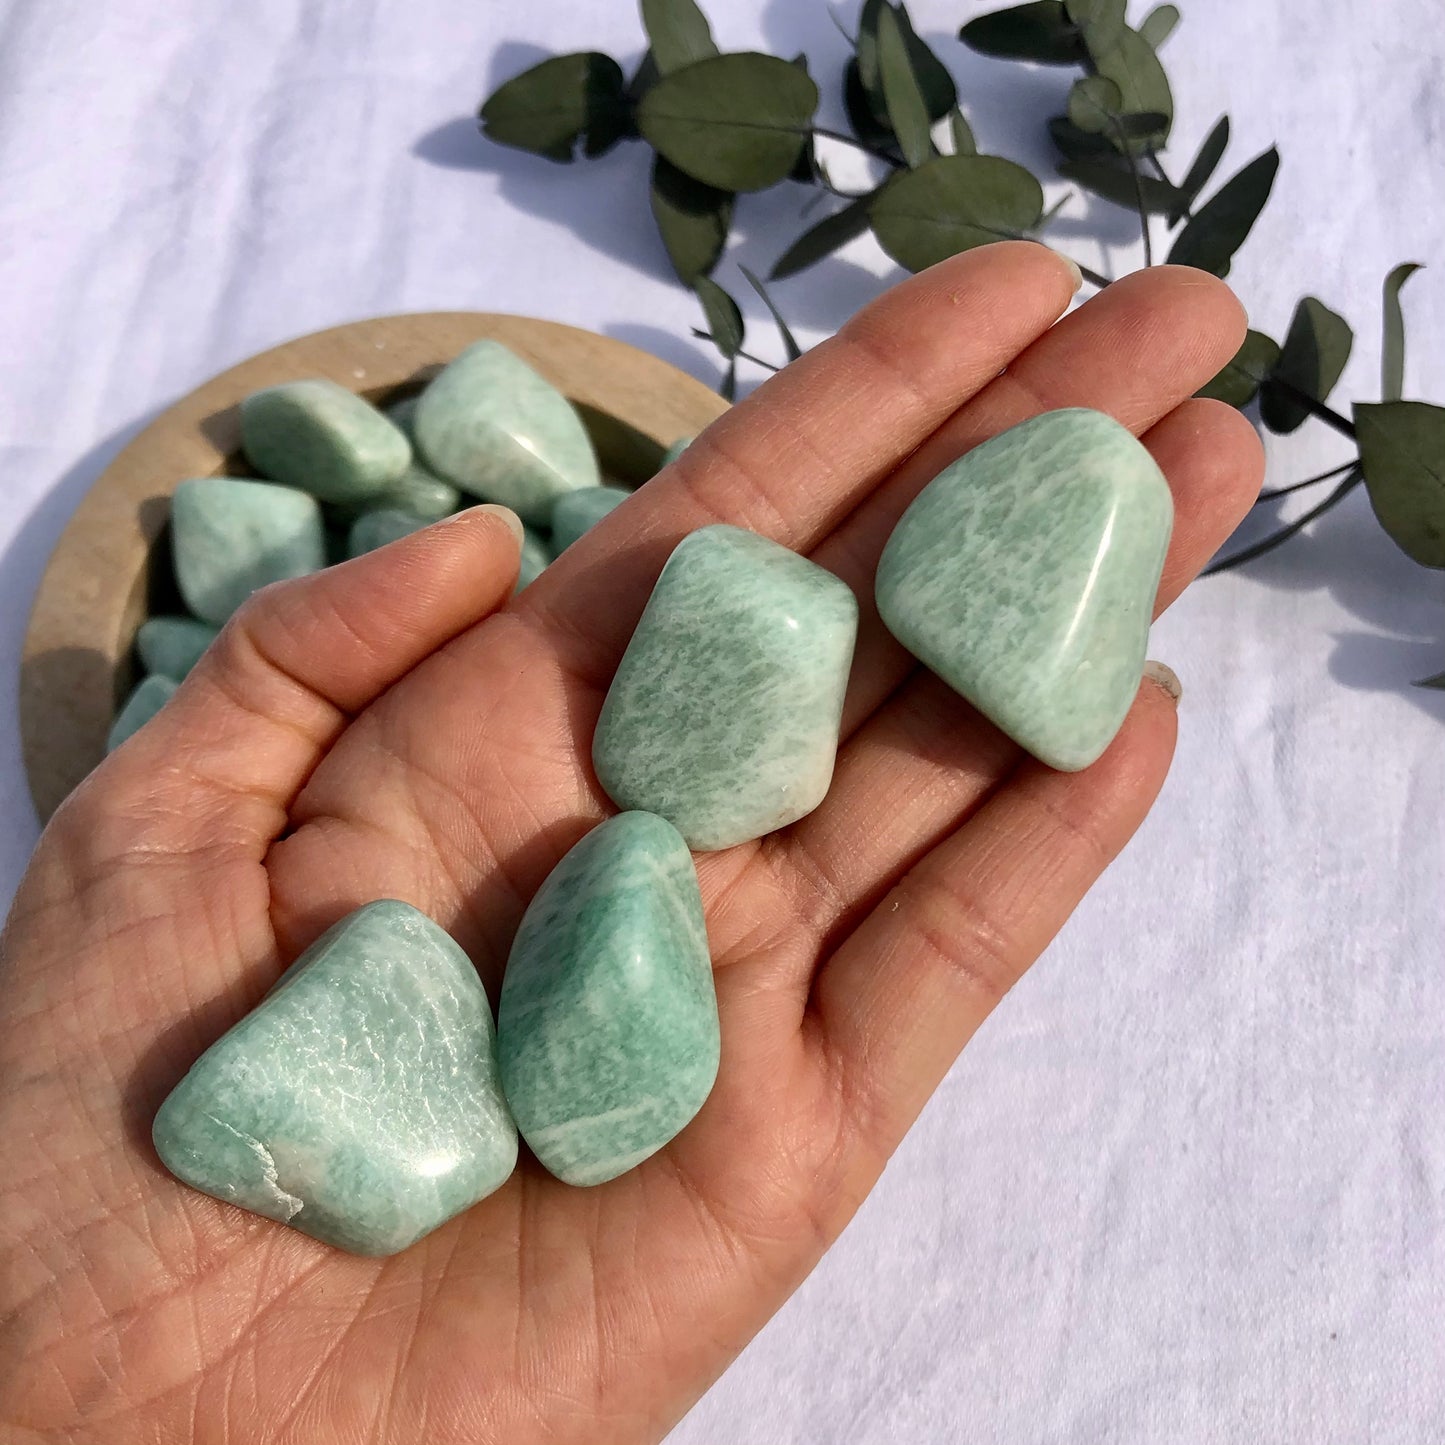 Extra large chunky turquoise coloured amazonite crystal tumble stones held in the palm of a hand